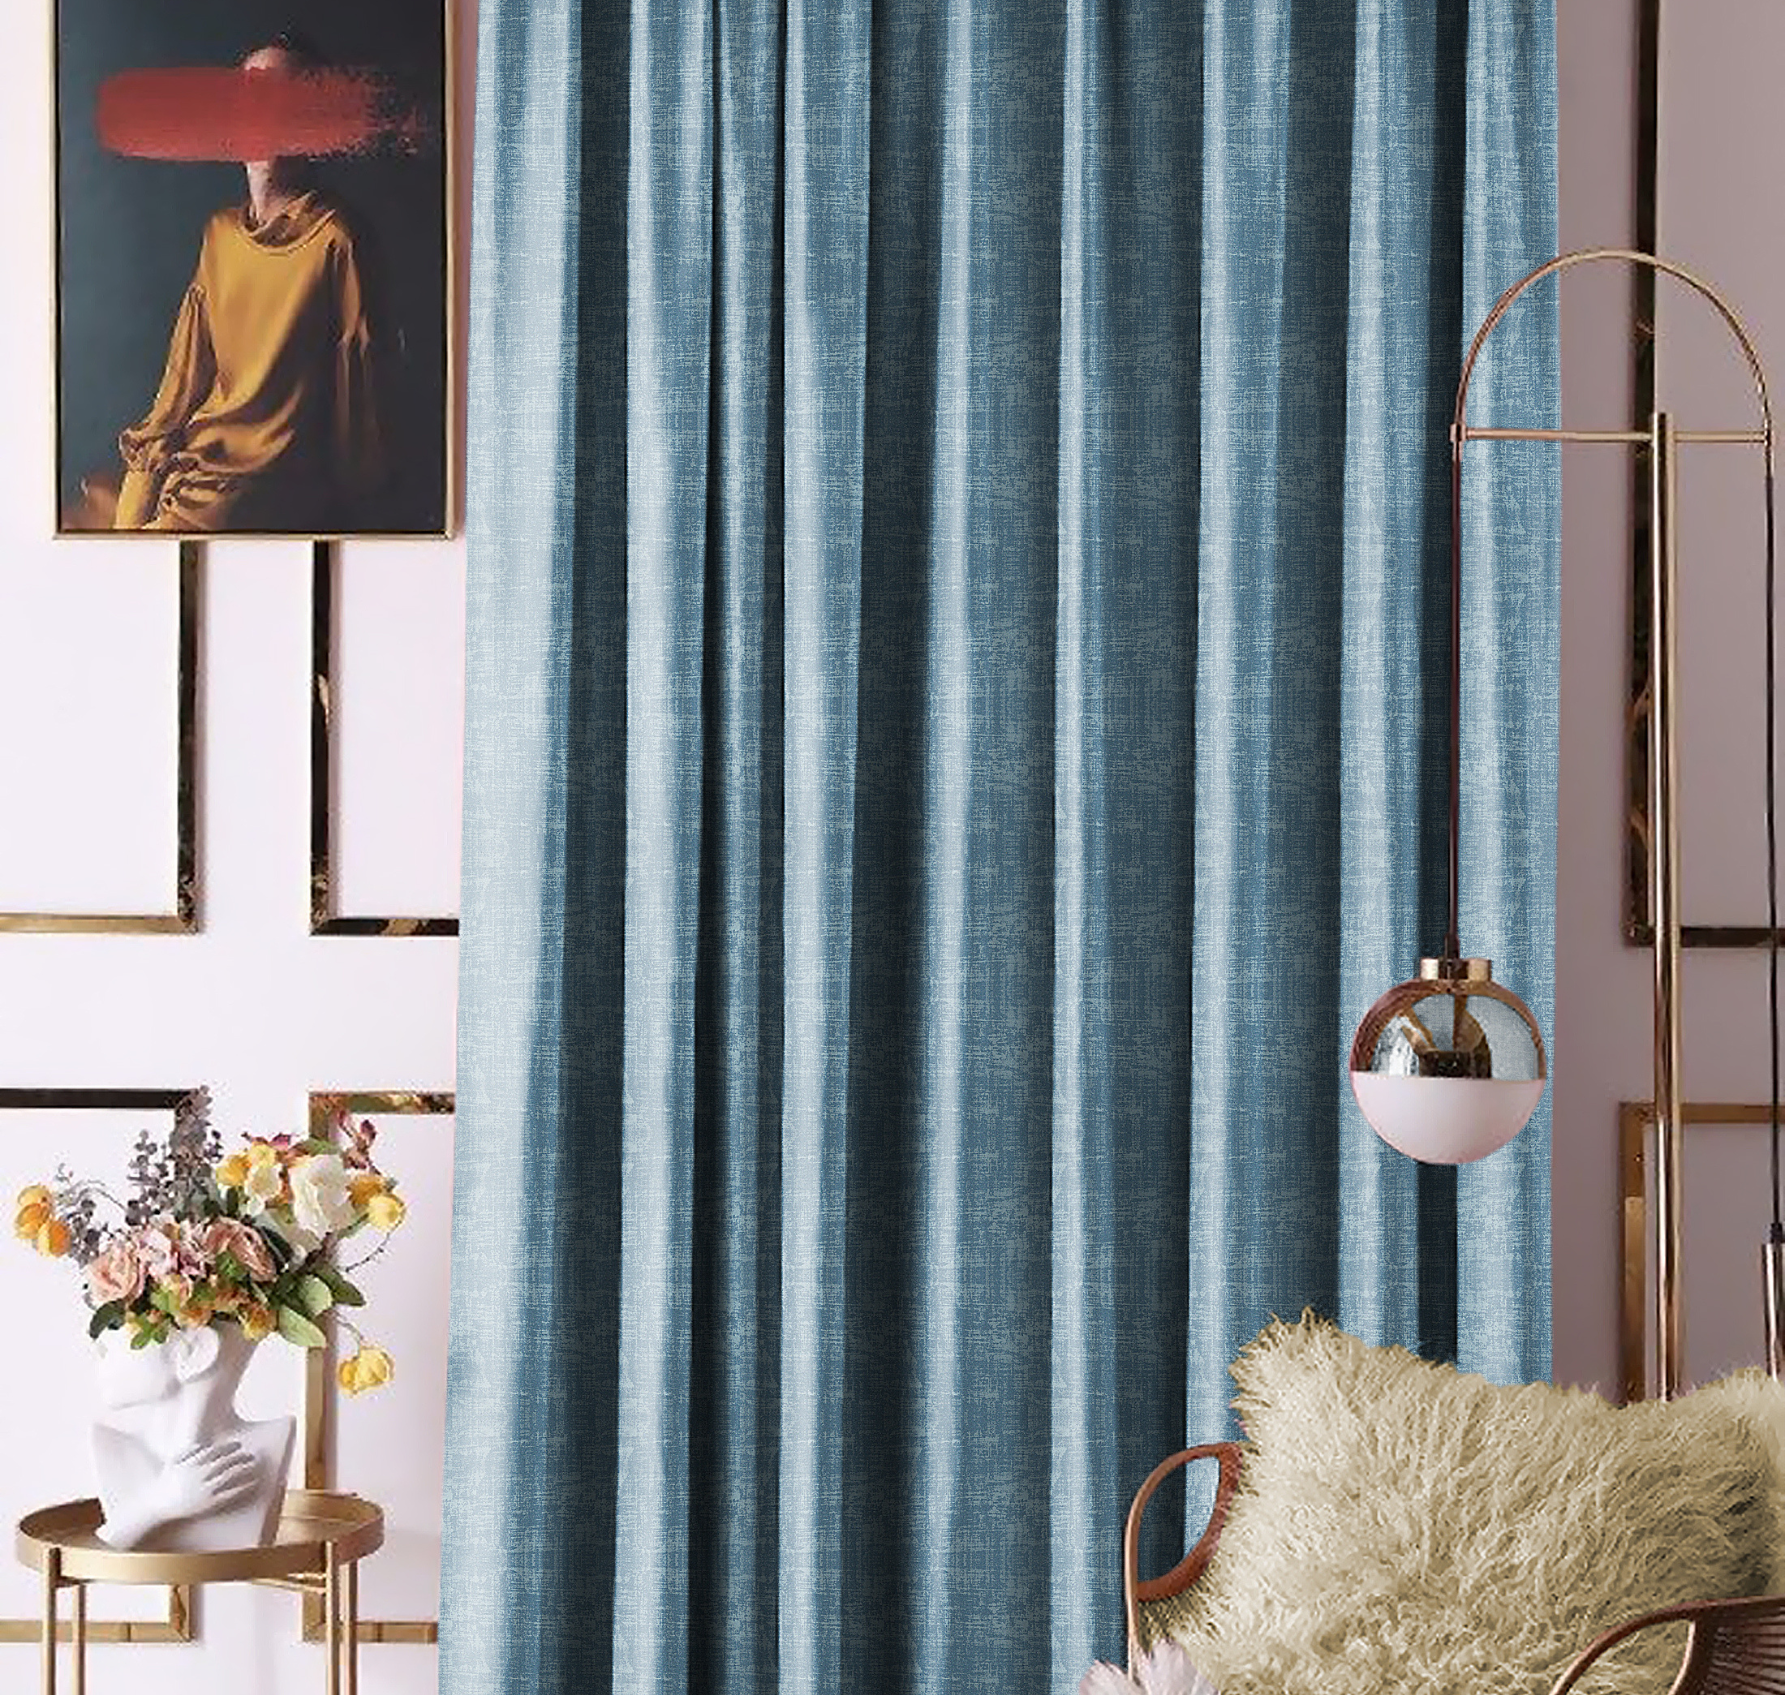 A living room showcasing elegant blackouts curtain fabric in a blue shade